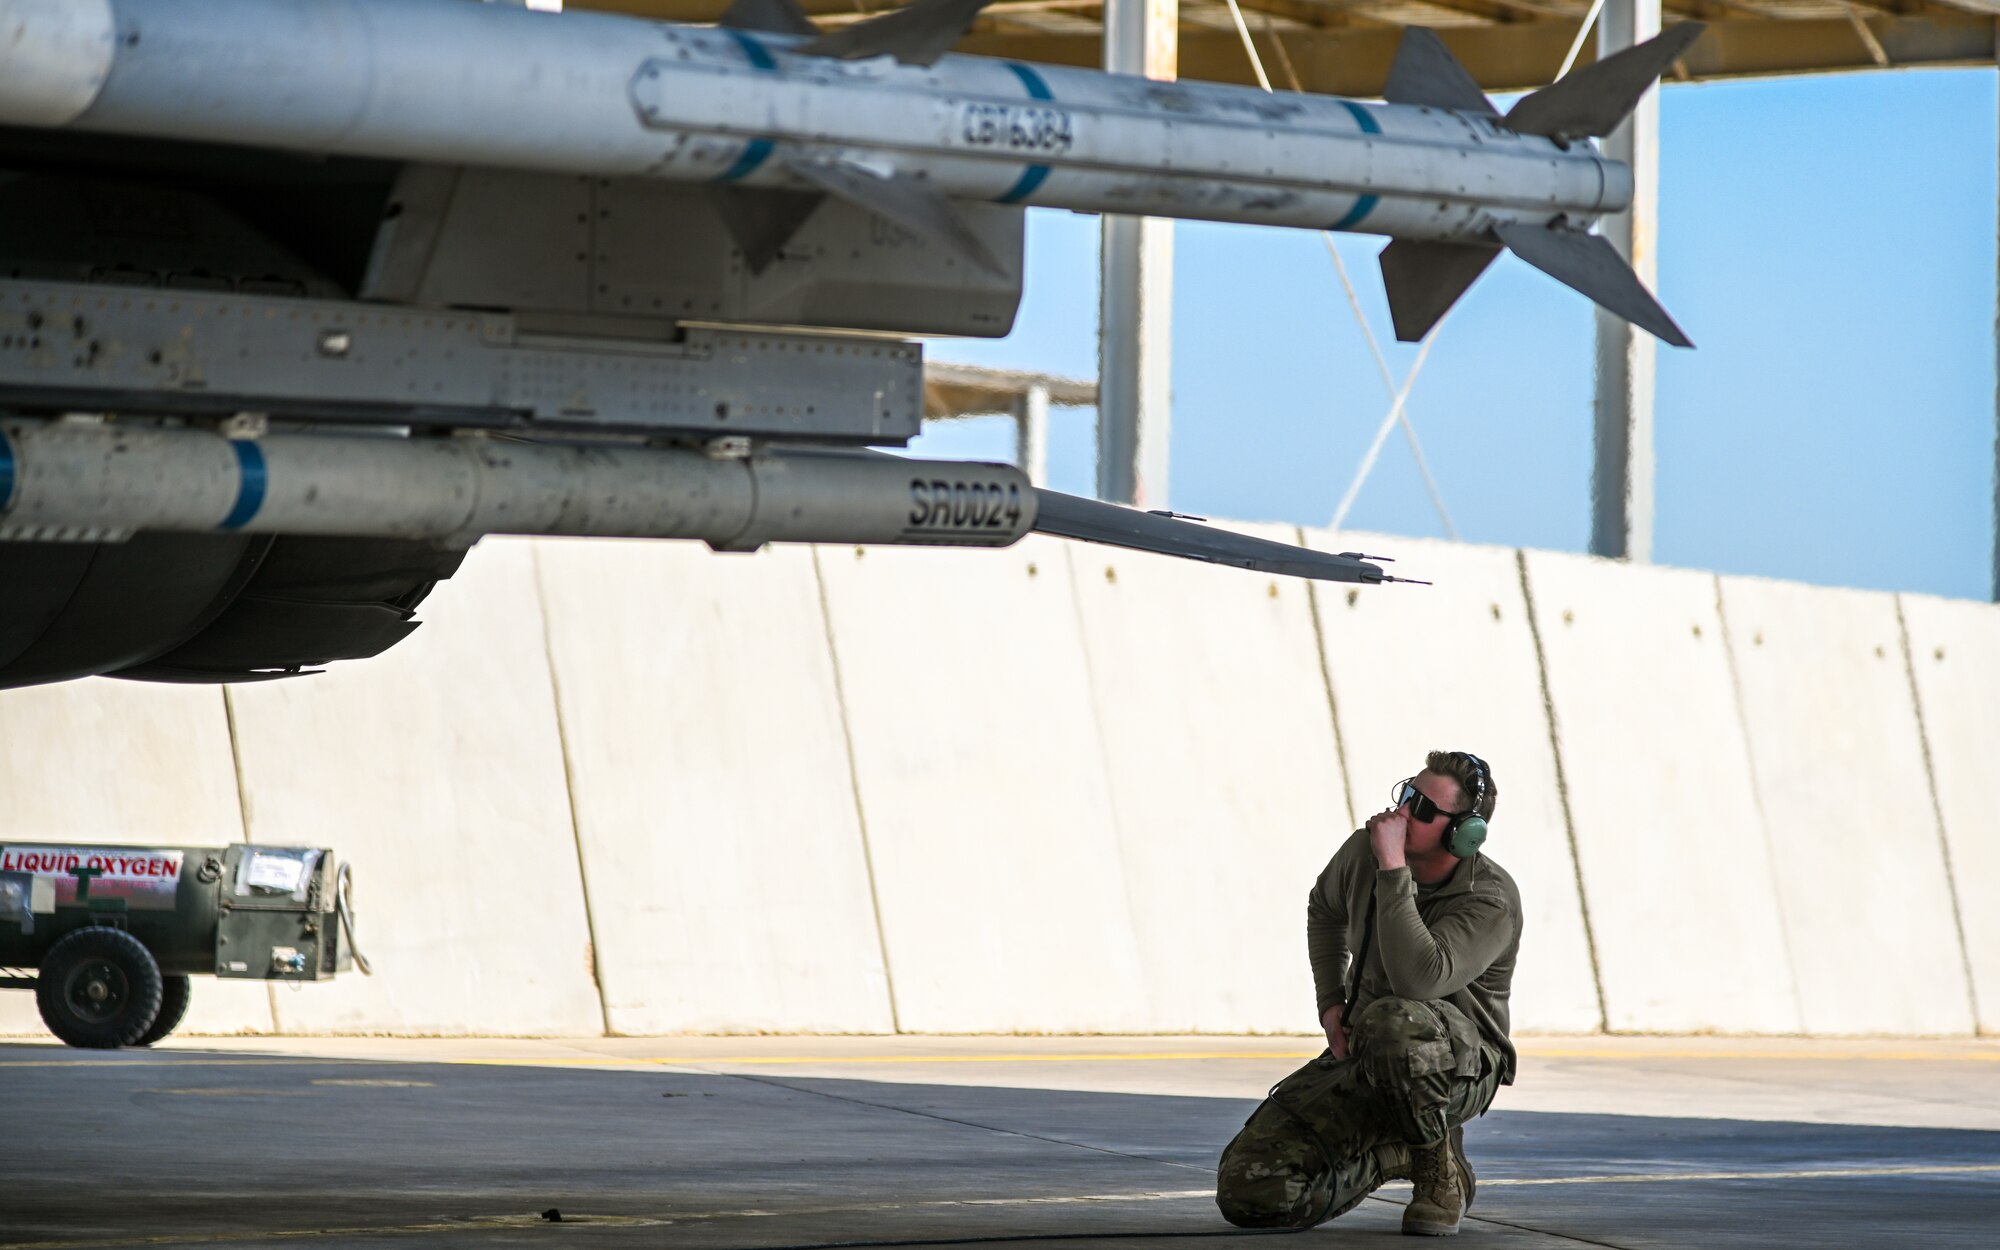 U.S. Air Force Airman 1st Class Trace Cannon, 378th Expeditionary Maintenance Squadron crew chief, conducts pre-flight checks for an F-16 Fighting Falcon at King Abdulaziz Air Base, Kingdom of Saudi Arabia, Feb. 13, 2022. Service members from the U.S., KSA, Pakistan and Bahrain conducted combined operations to better integrate partner capabilities. (U.S. Air Force photo by Staff Sgt. Christina A. Graves)